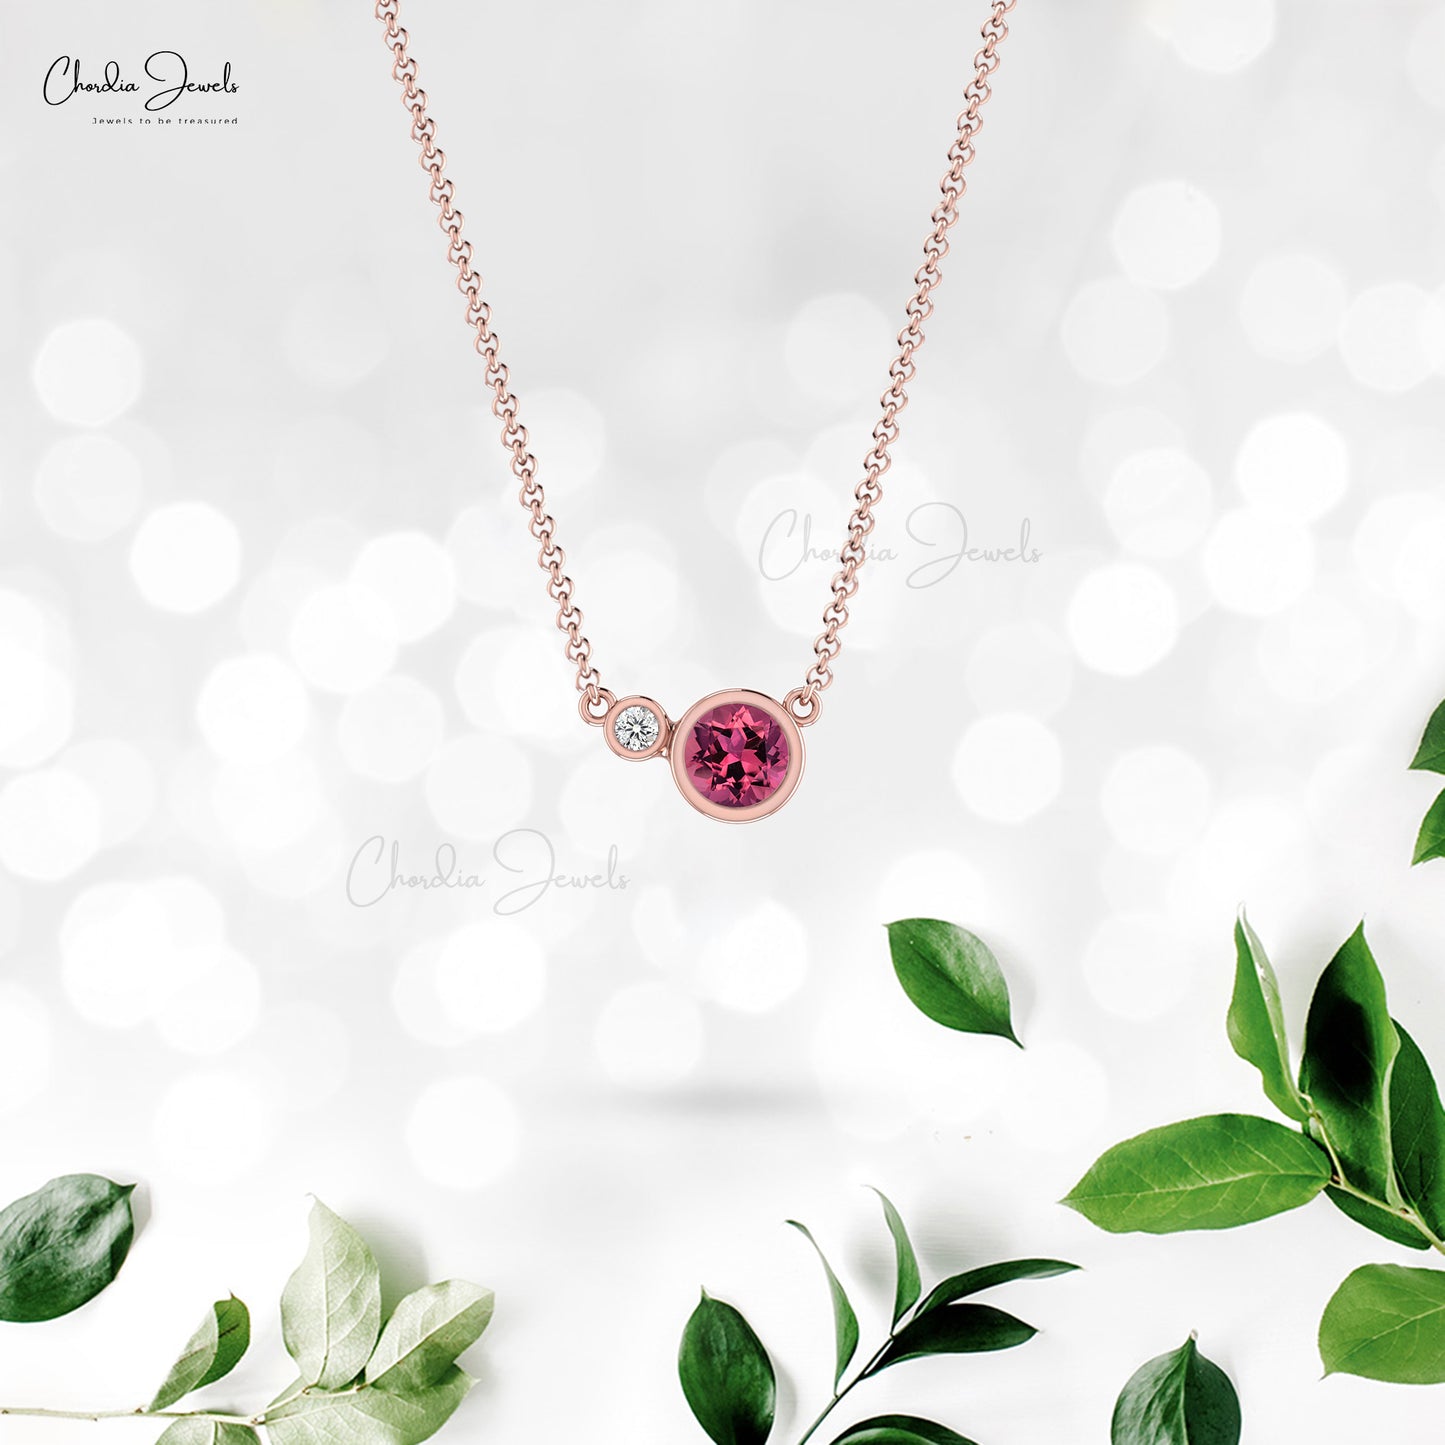 Natural Pink Tourmaline Necklace, October Birthstone Necklace, 14k Solid Gold Diamond Necklace, 5mm Round Faceted Gemstone Necklace Gift for Her